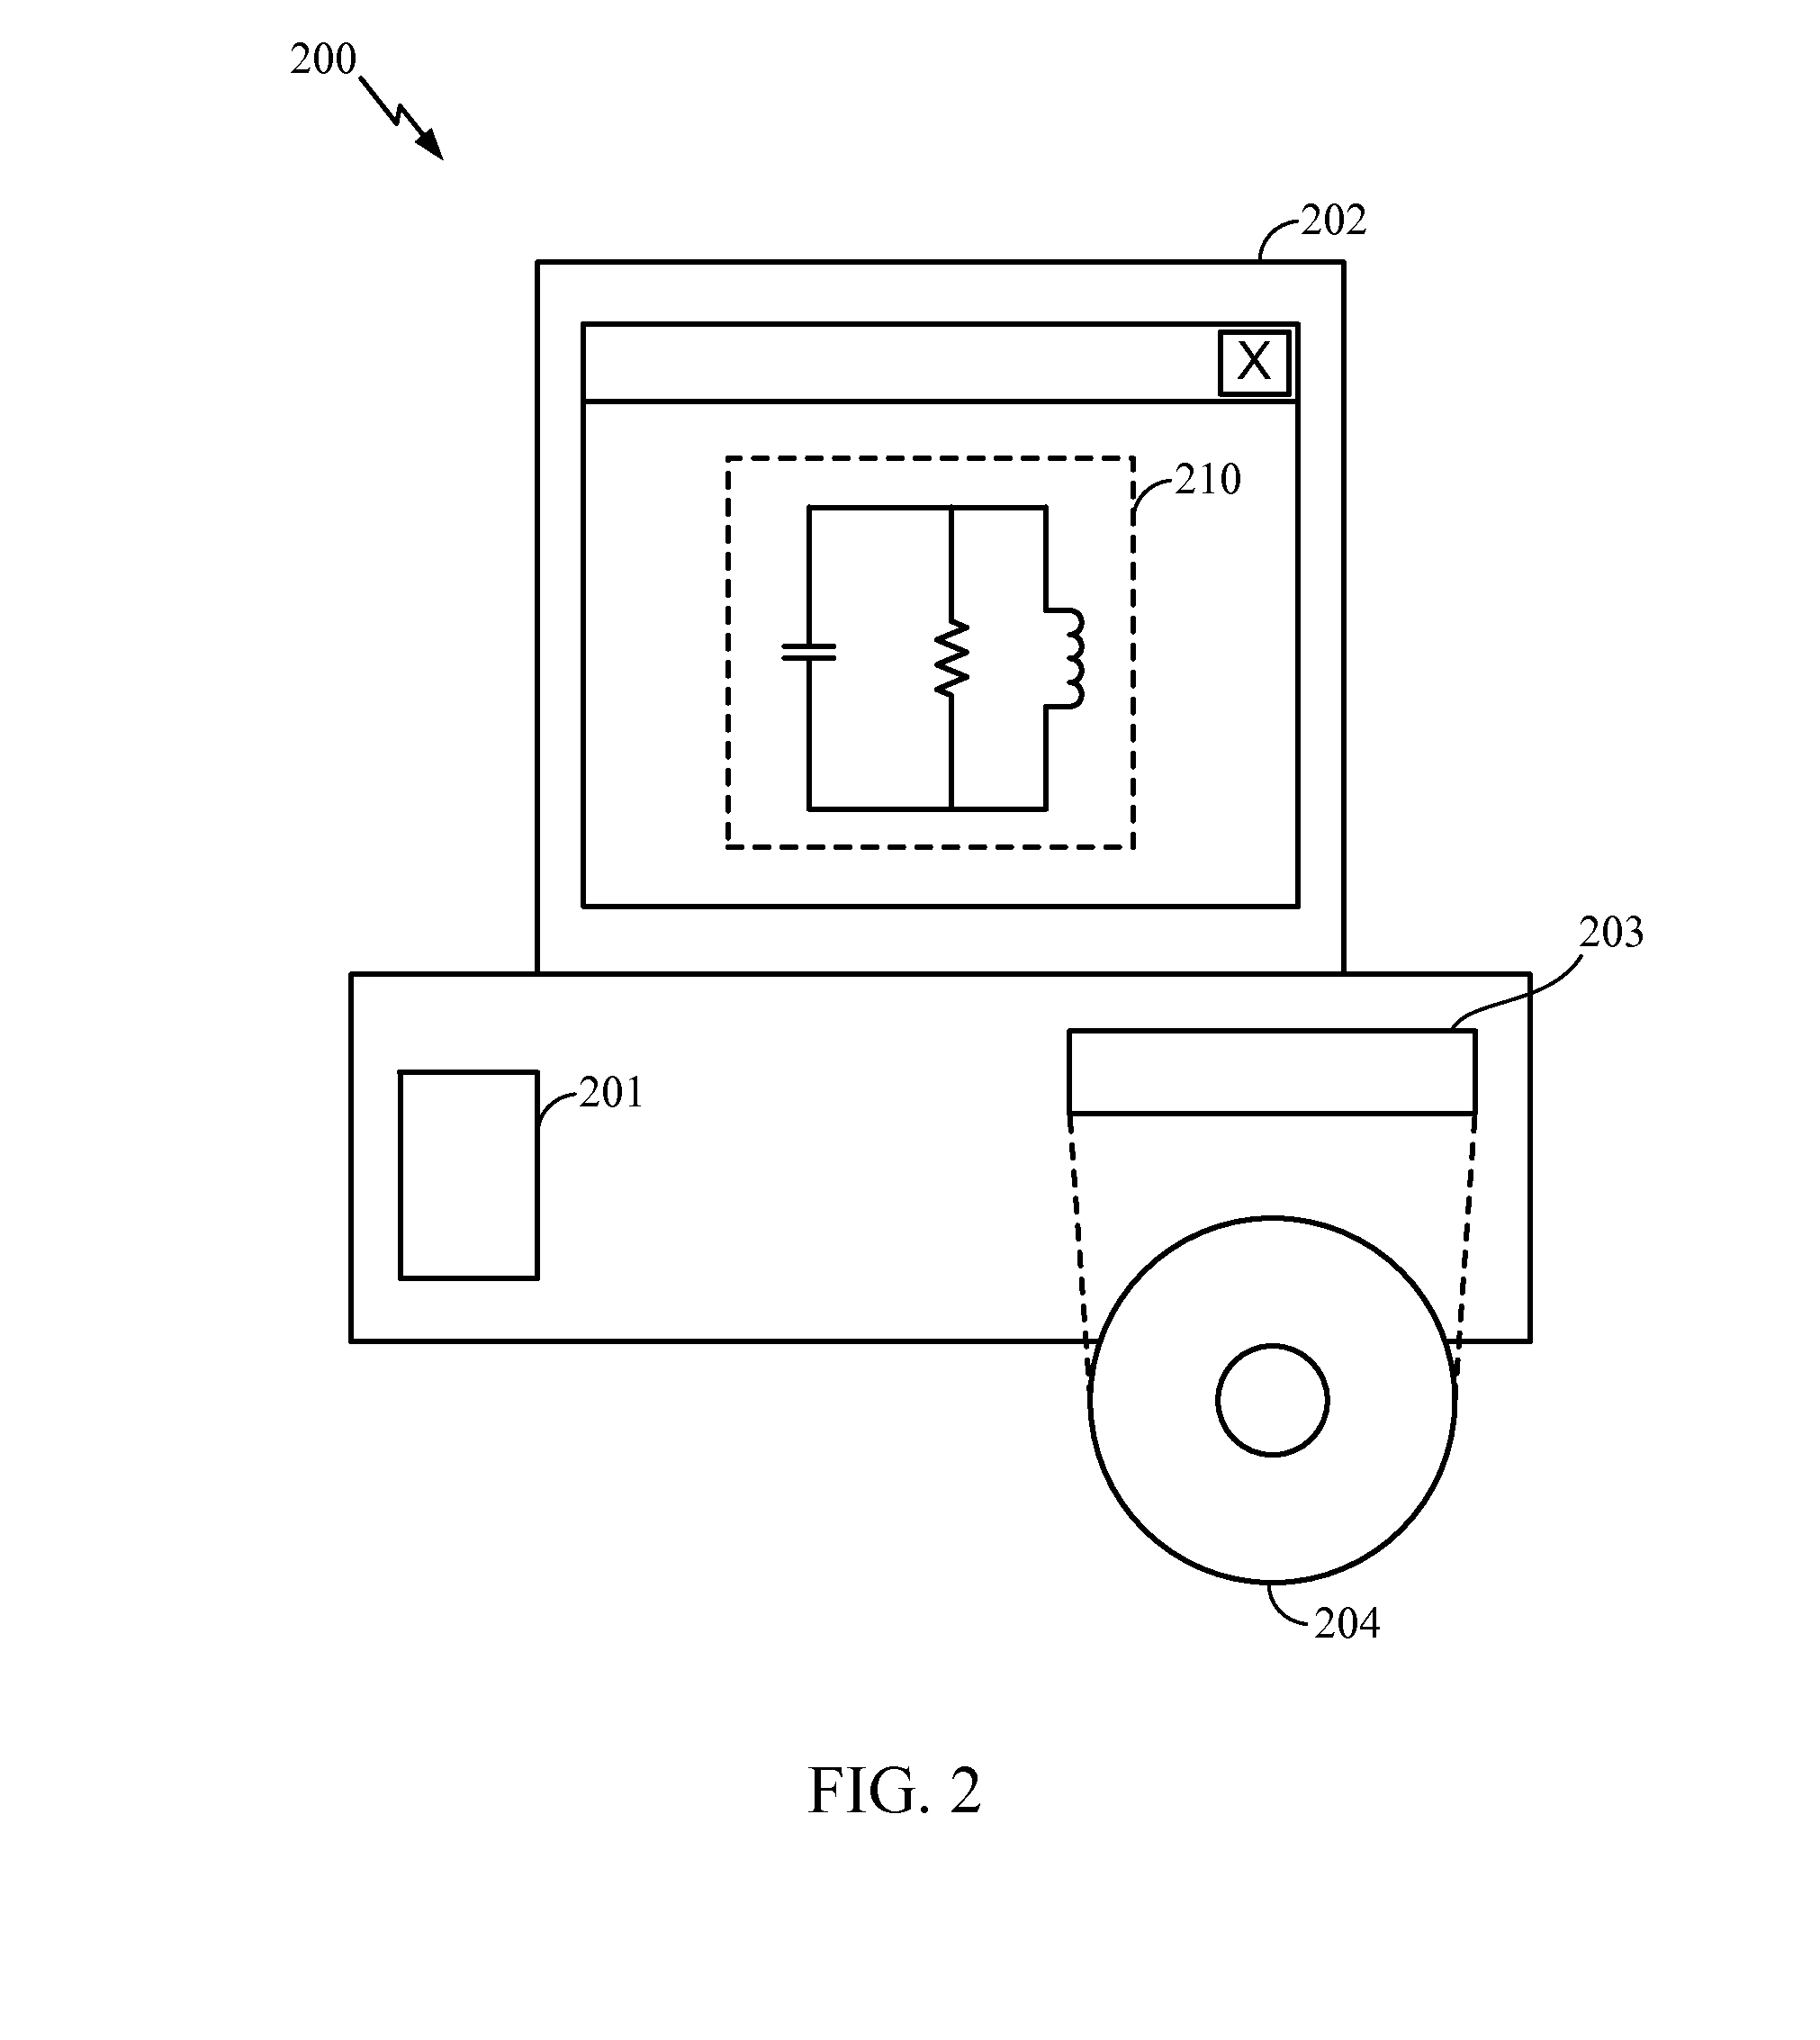 Circuit for Measuring Magnitude of Electrostatic Discharge (ESD) Events for Semiconductor Chip Bonding